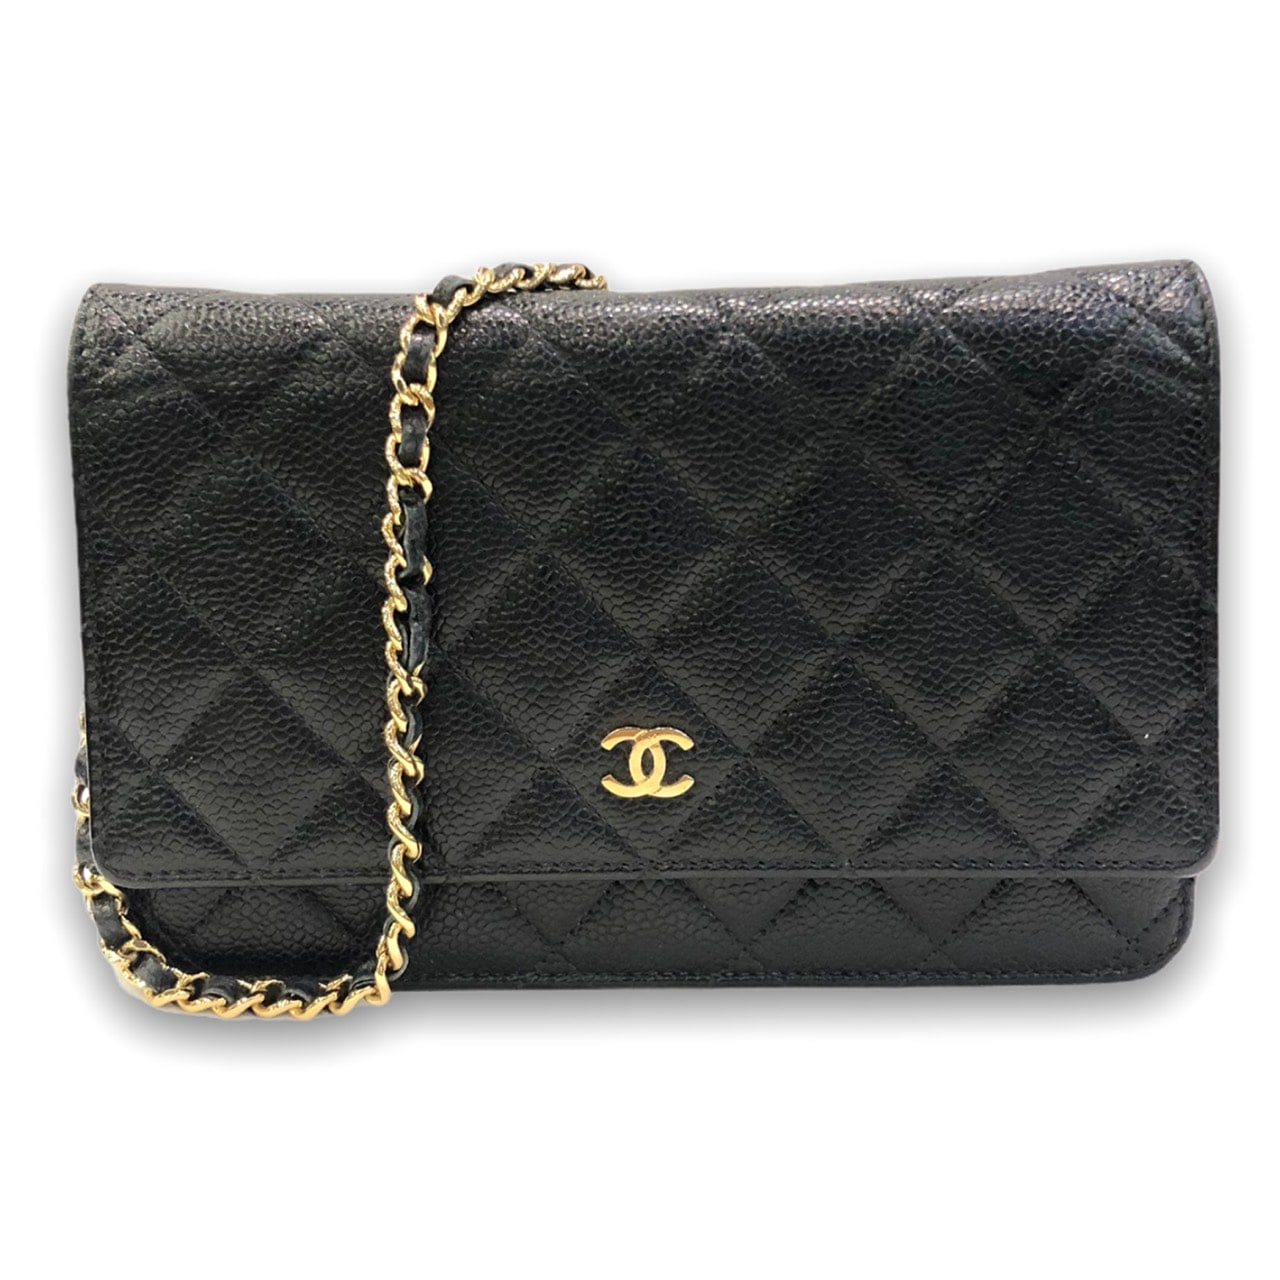 Used!I in good condition Chanel wallet on chain 7.5” black caviar with gold hardware Holo 22